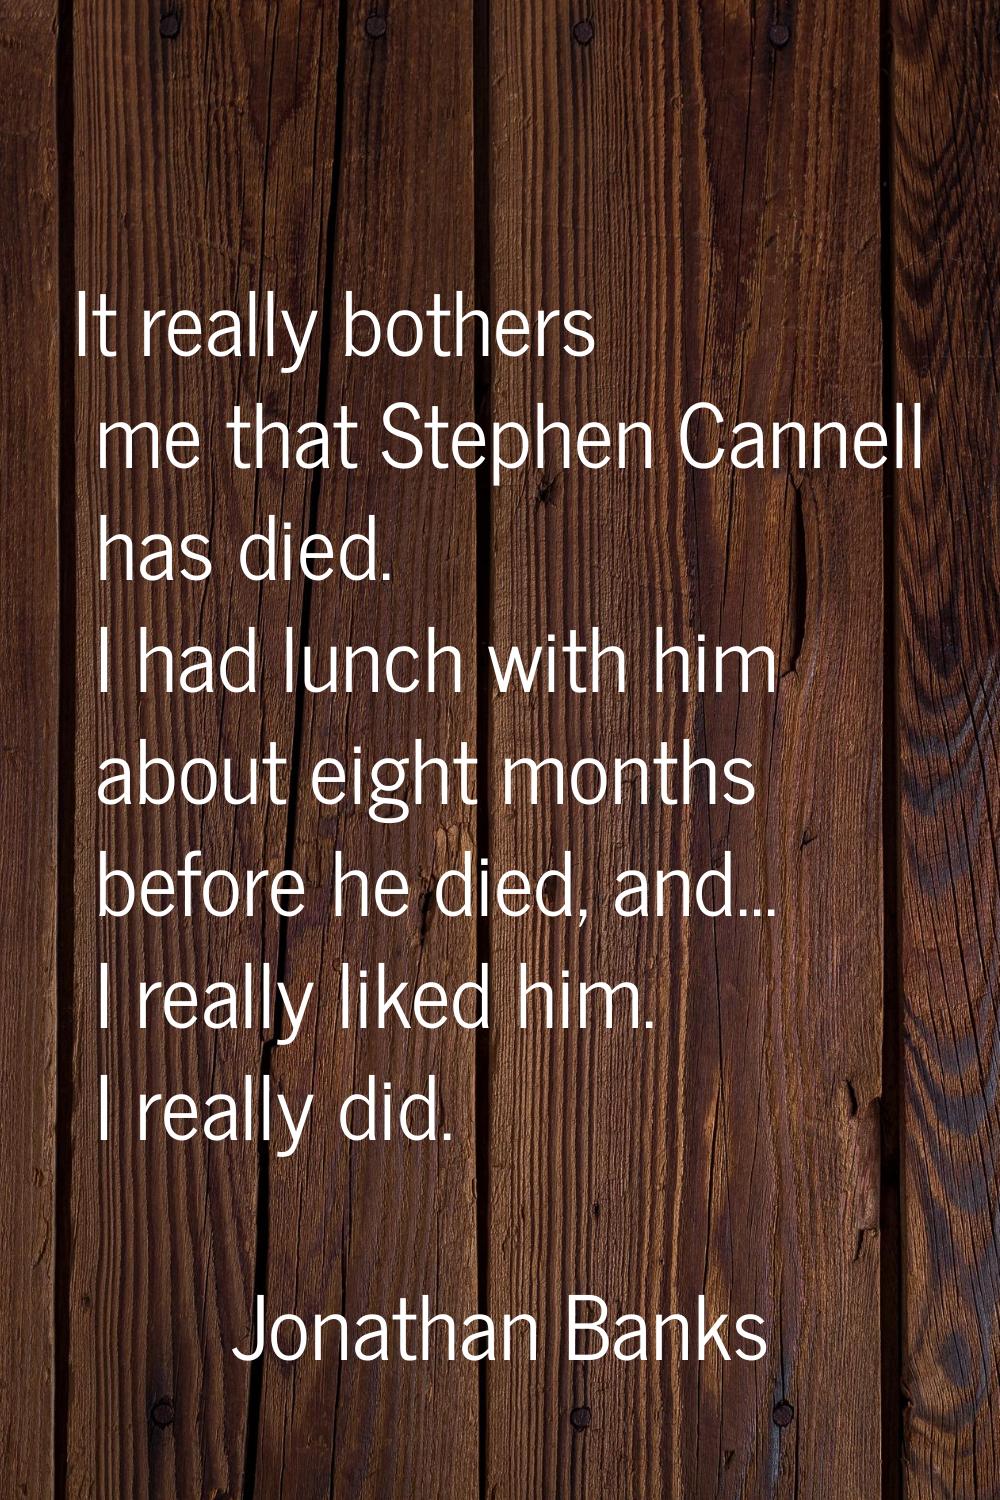 It really bothers me that Stephen Cannell has died. I had lunch with him about eight months before 